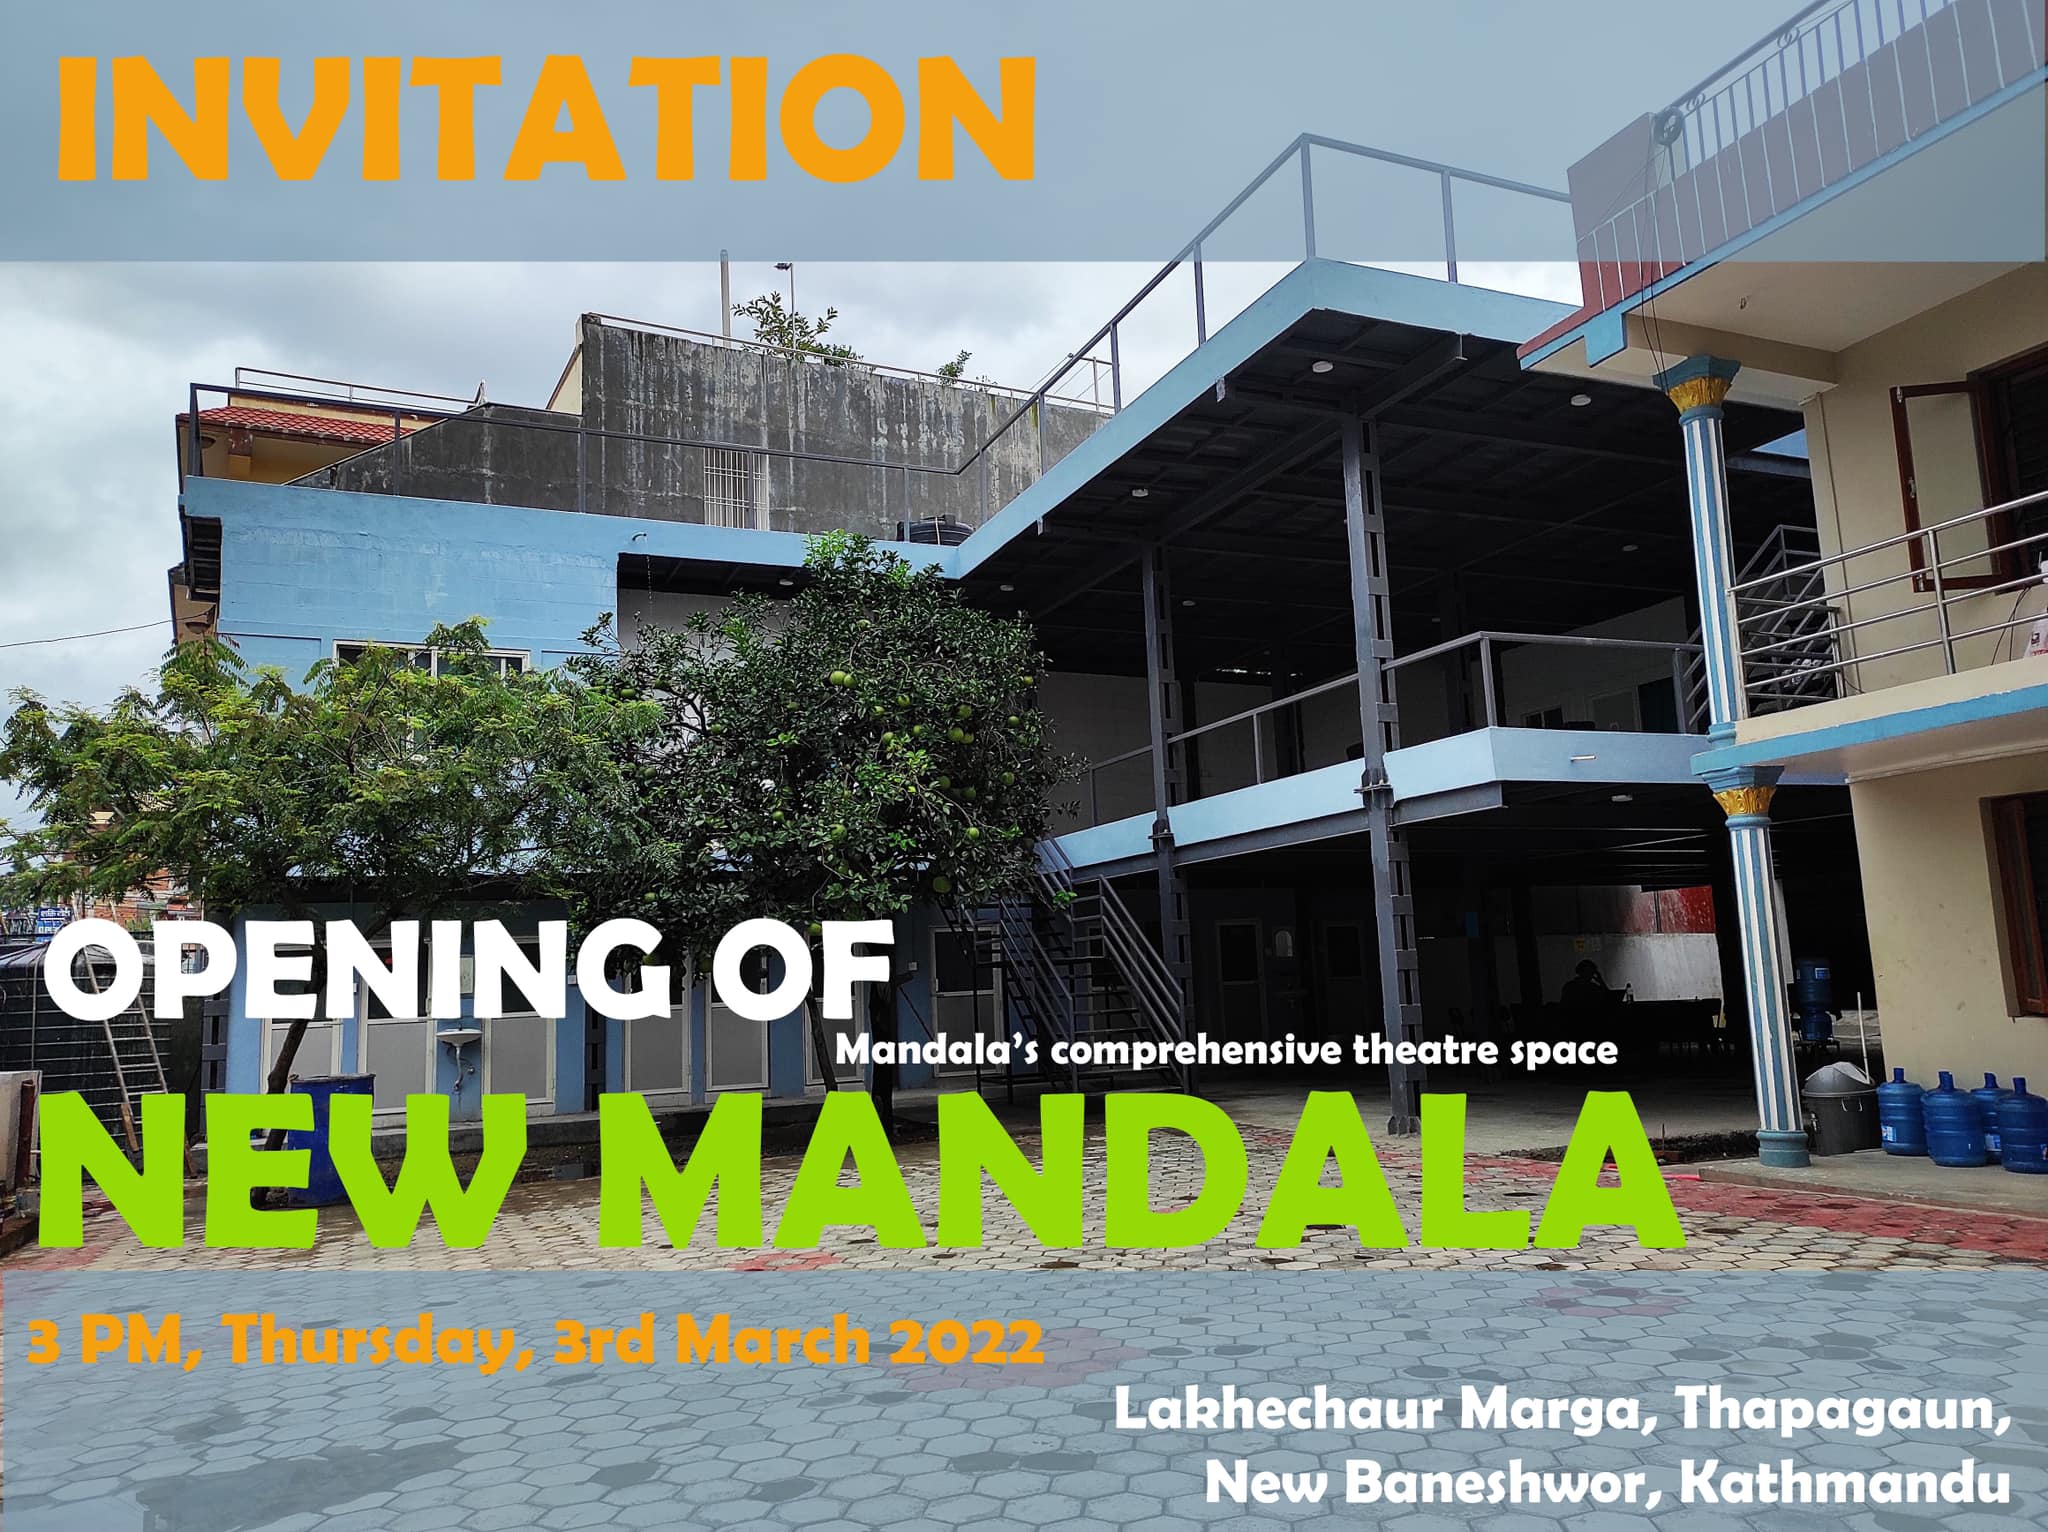 Mandala Theatre-Nepal officially opens new comprehensive theatre space